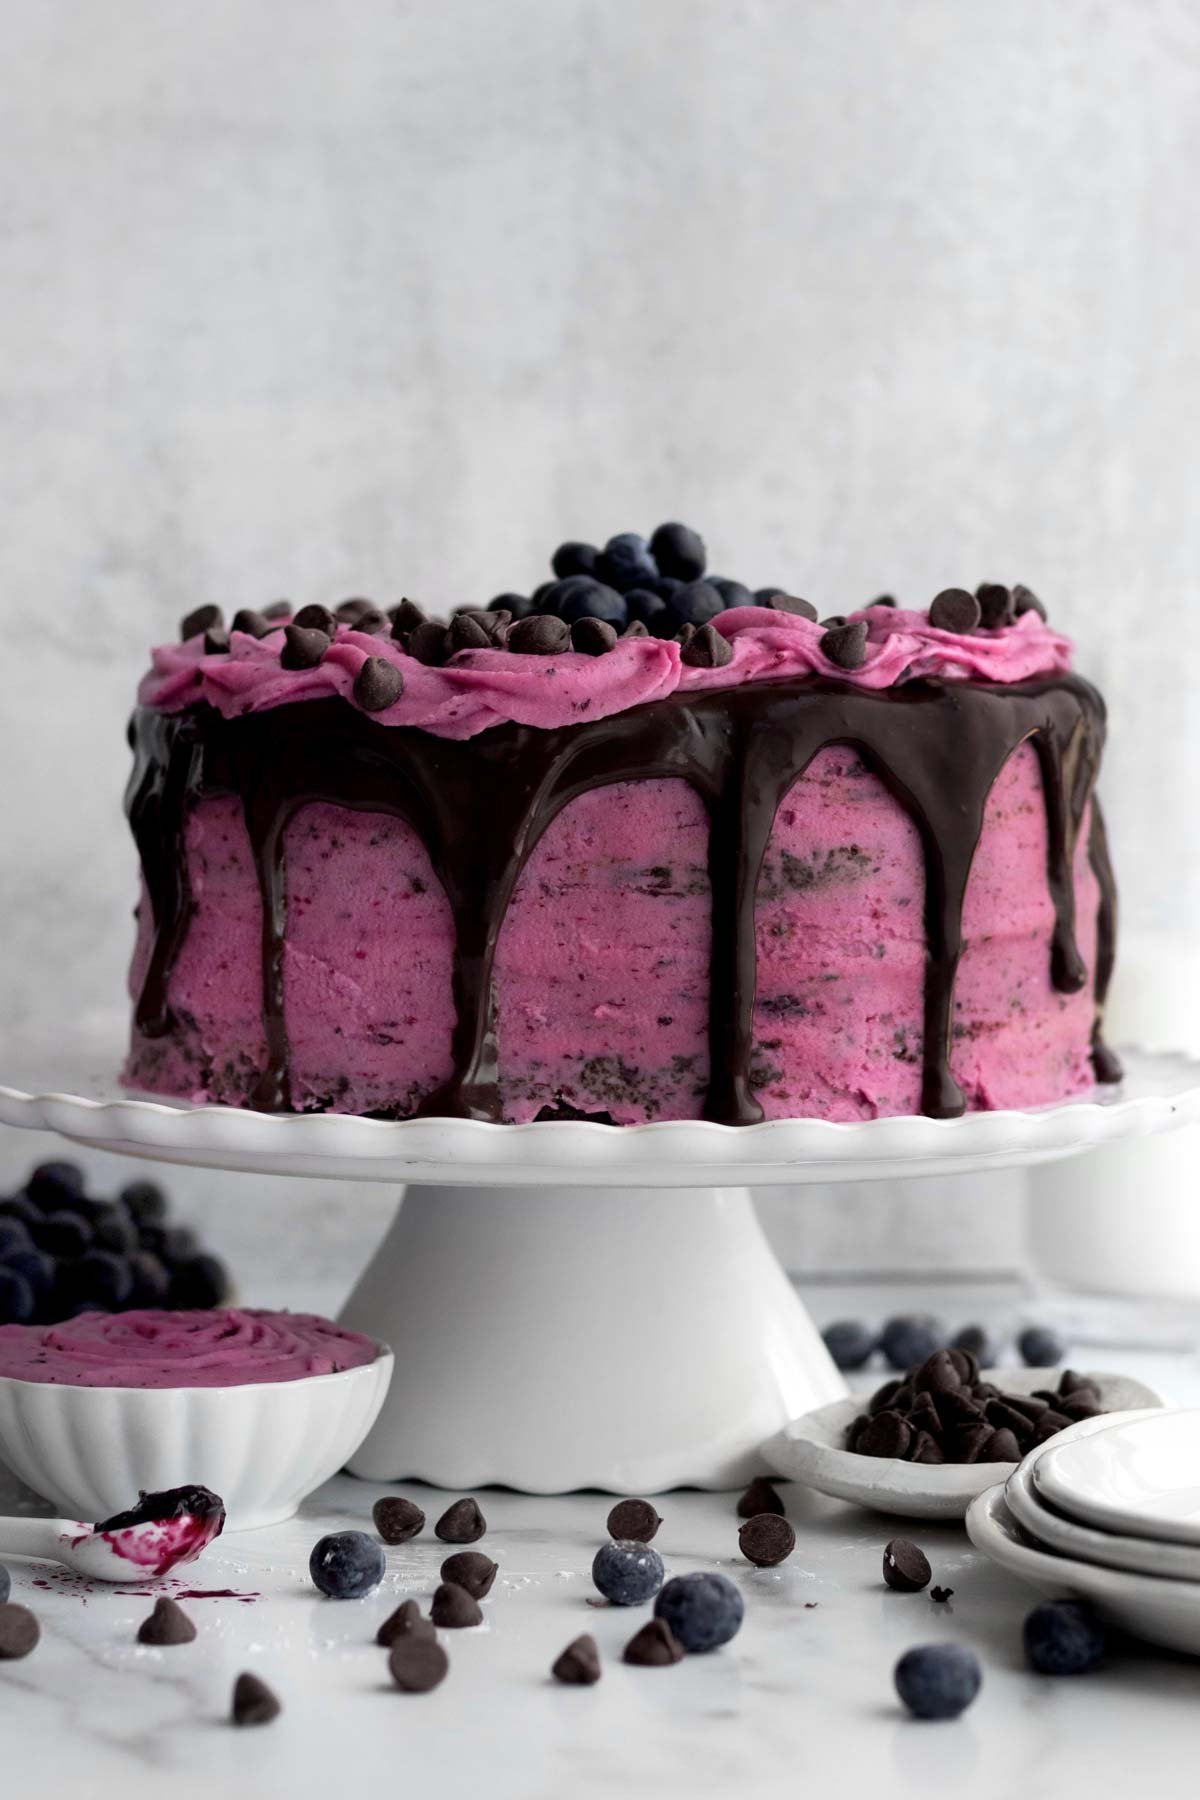 A complete Chocolate Blueberry Cake dripping with chocolate ganache topped with blueberries.